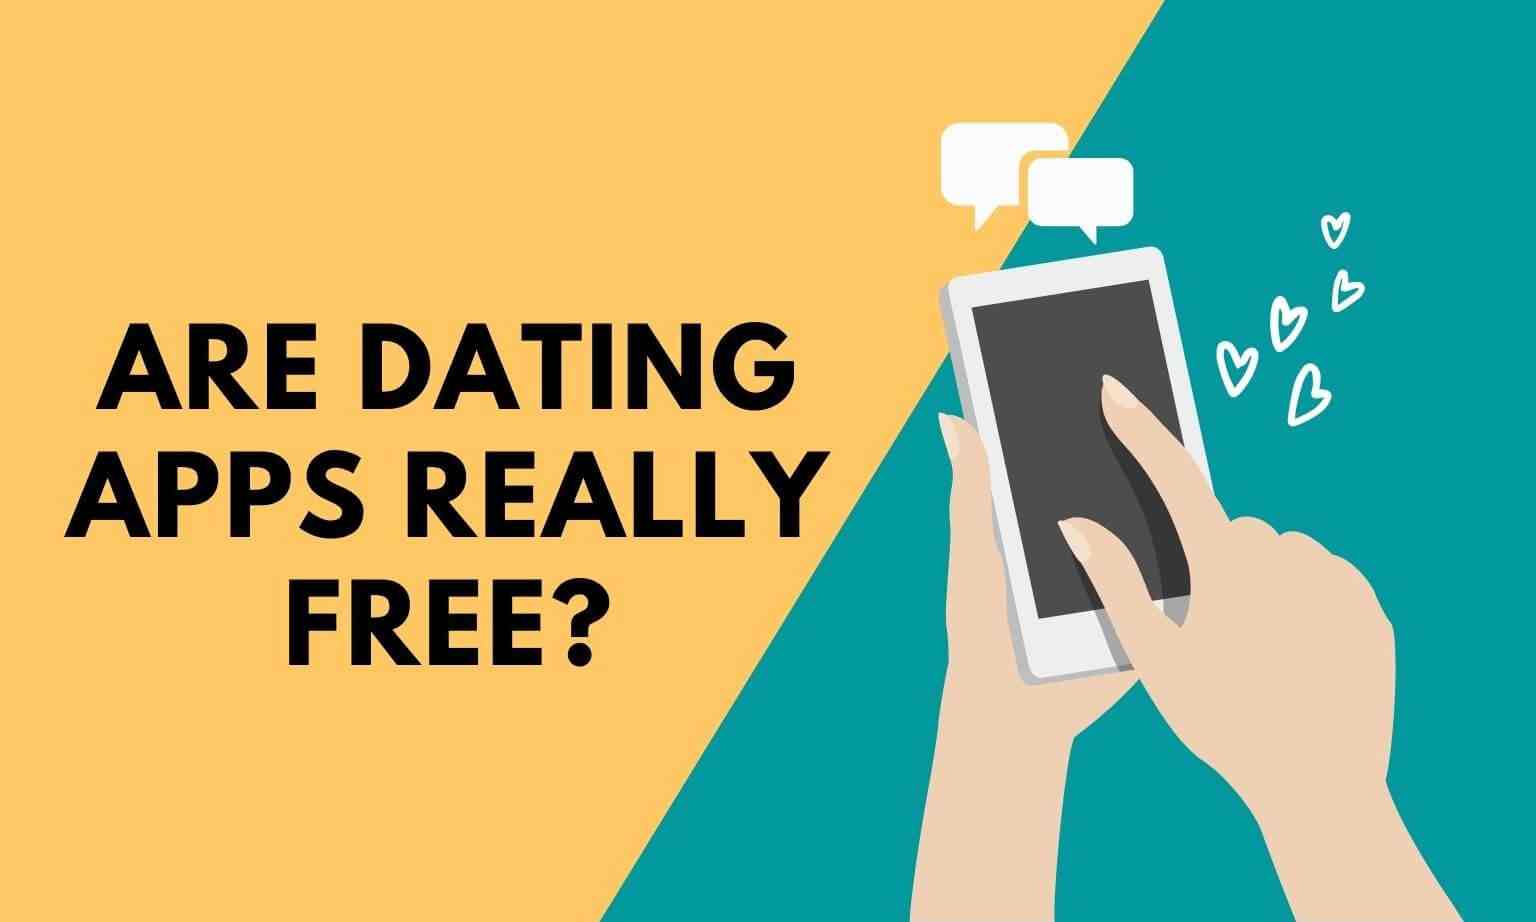 Are Dating apps free